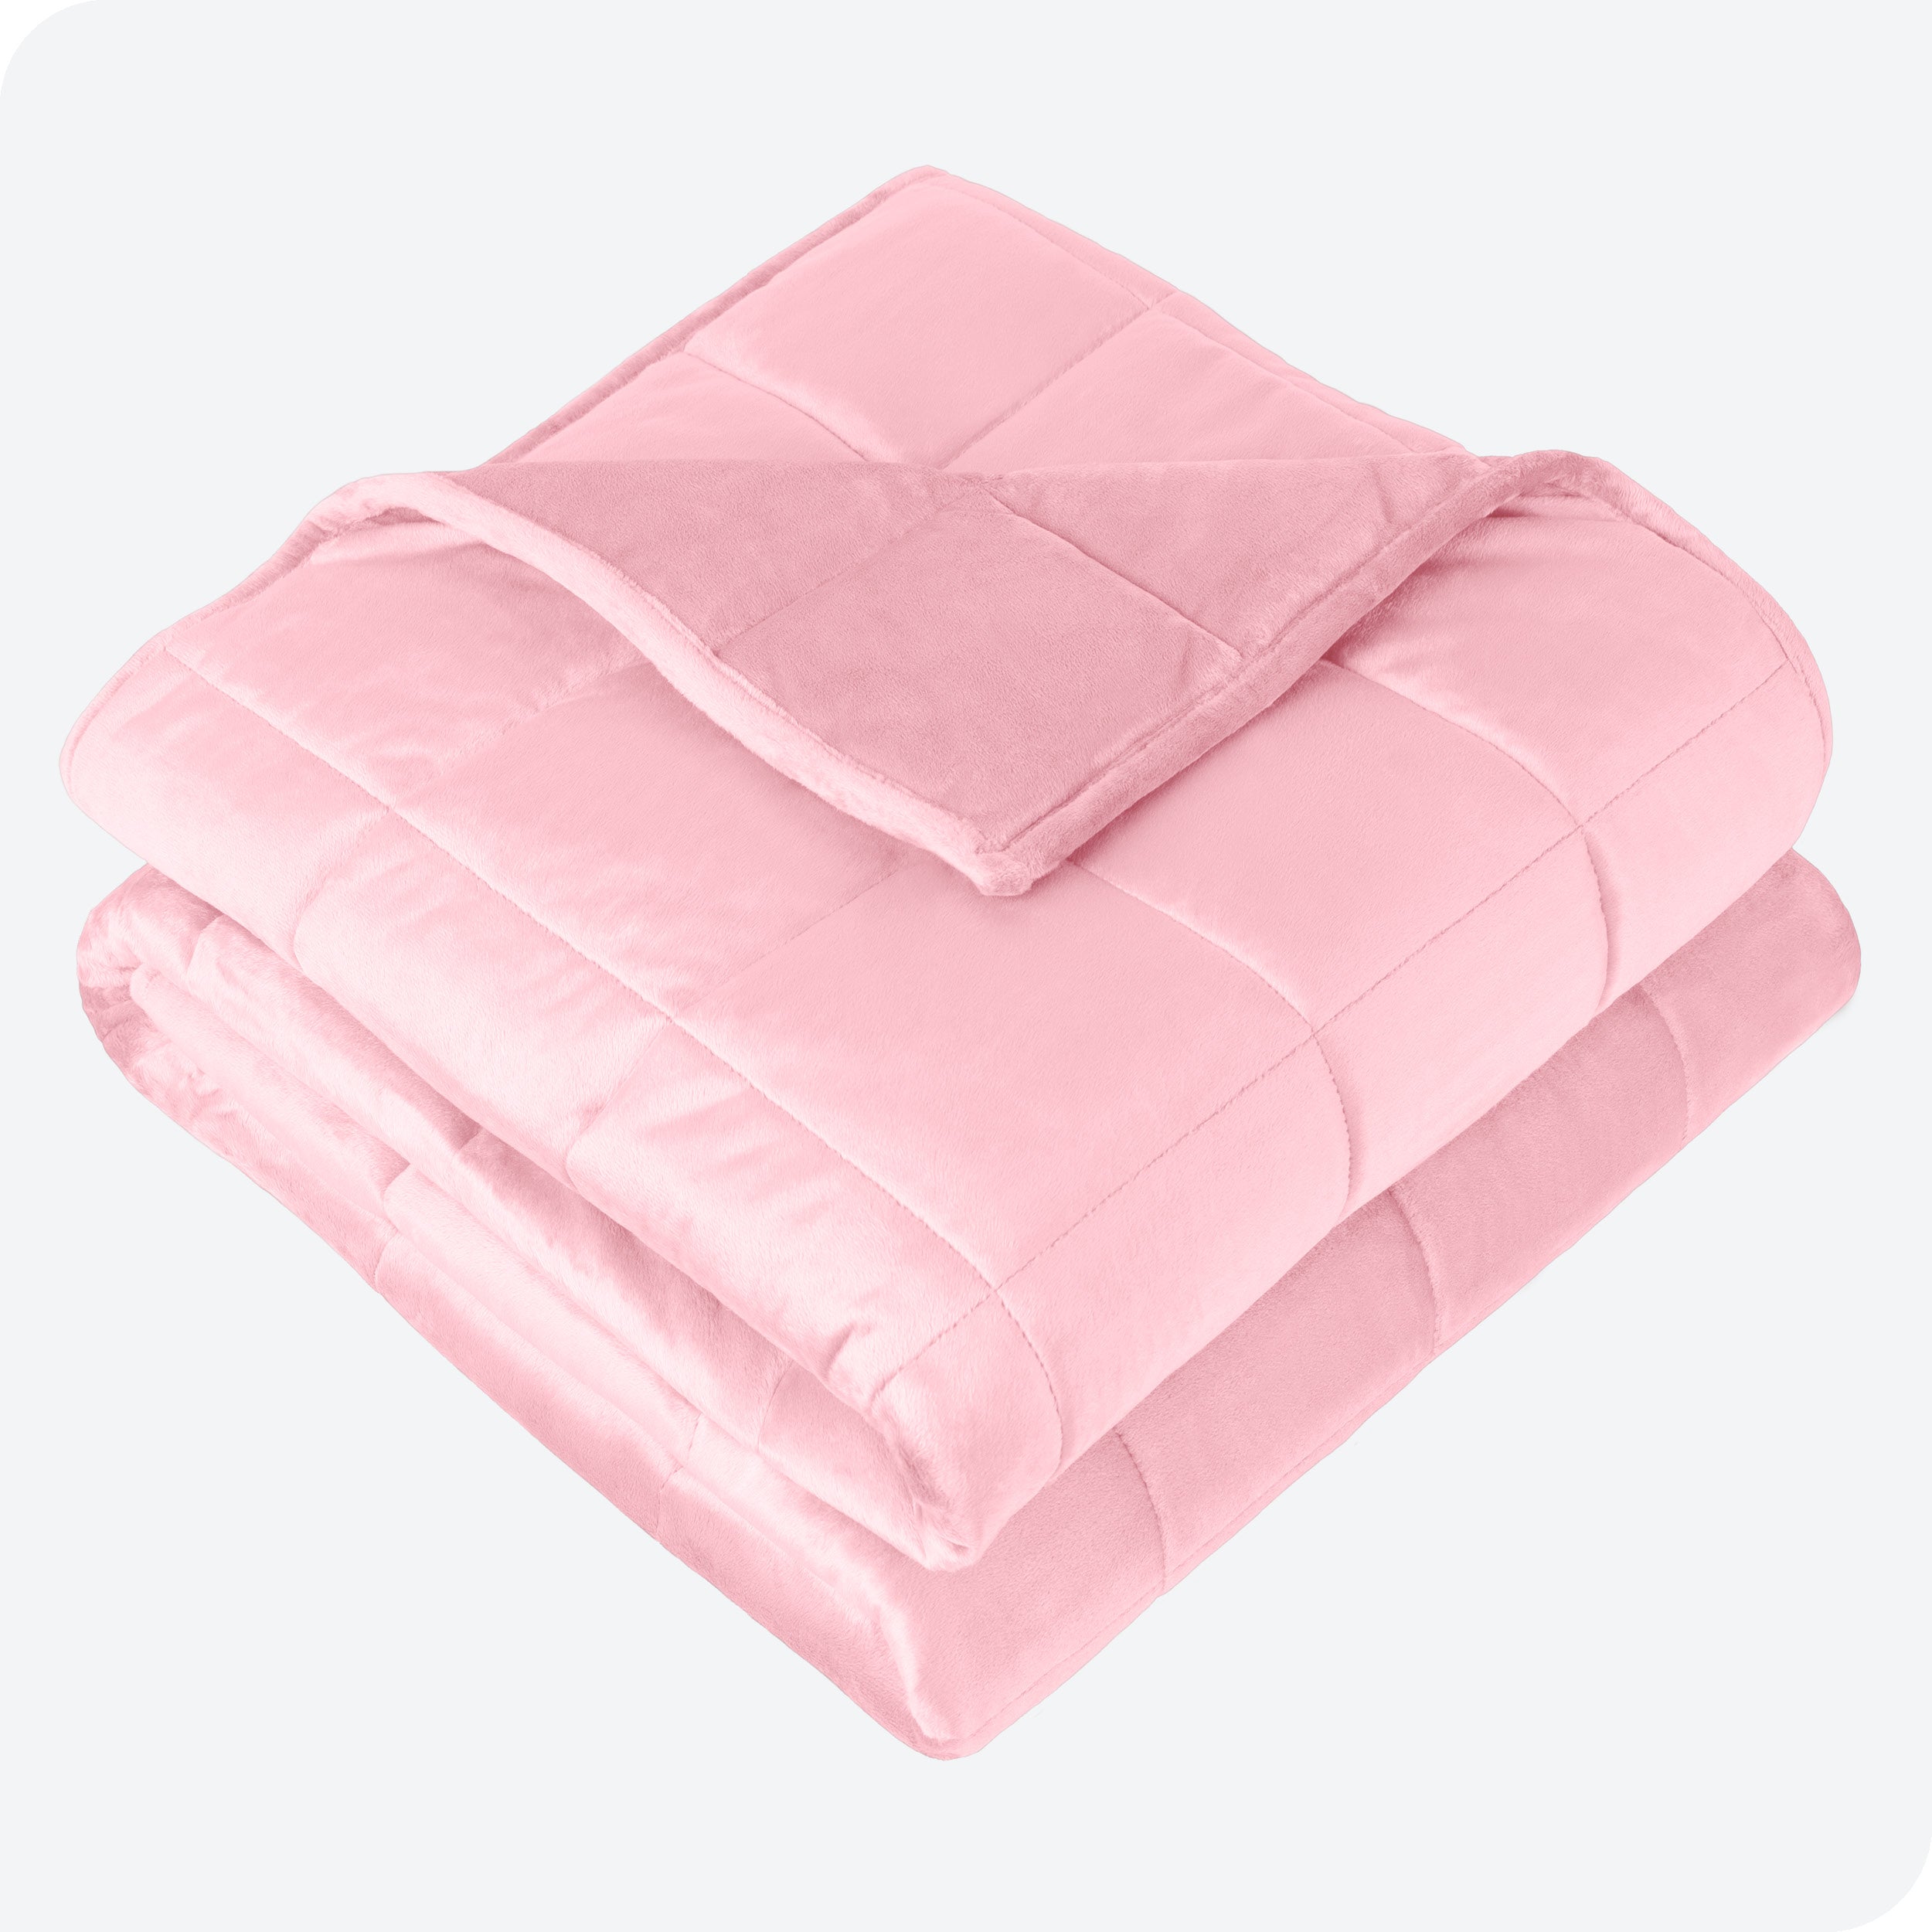 A minky weighted blanket folded neatly on a white background.